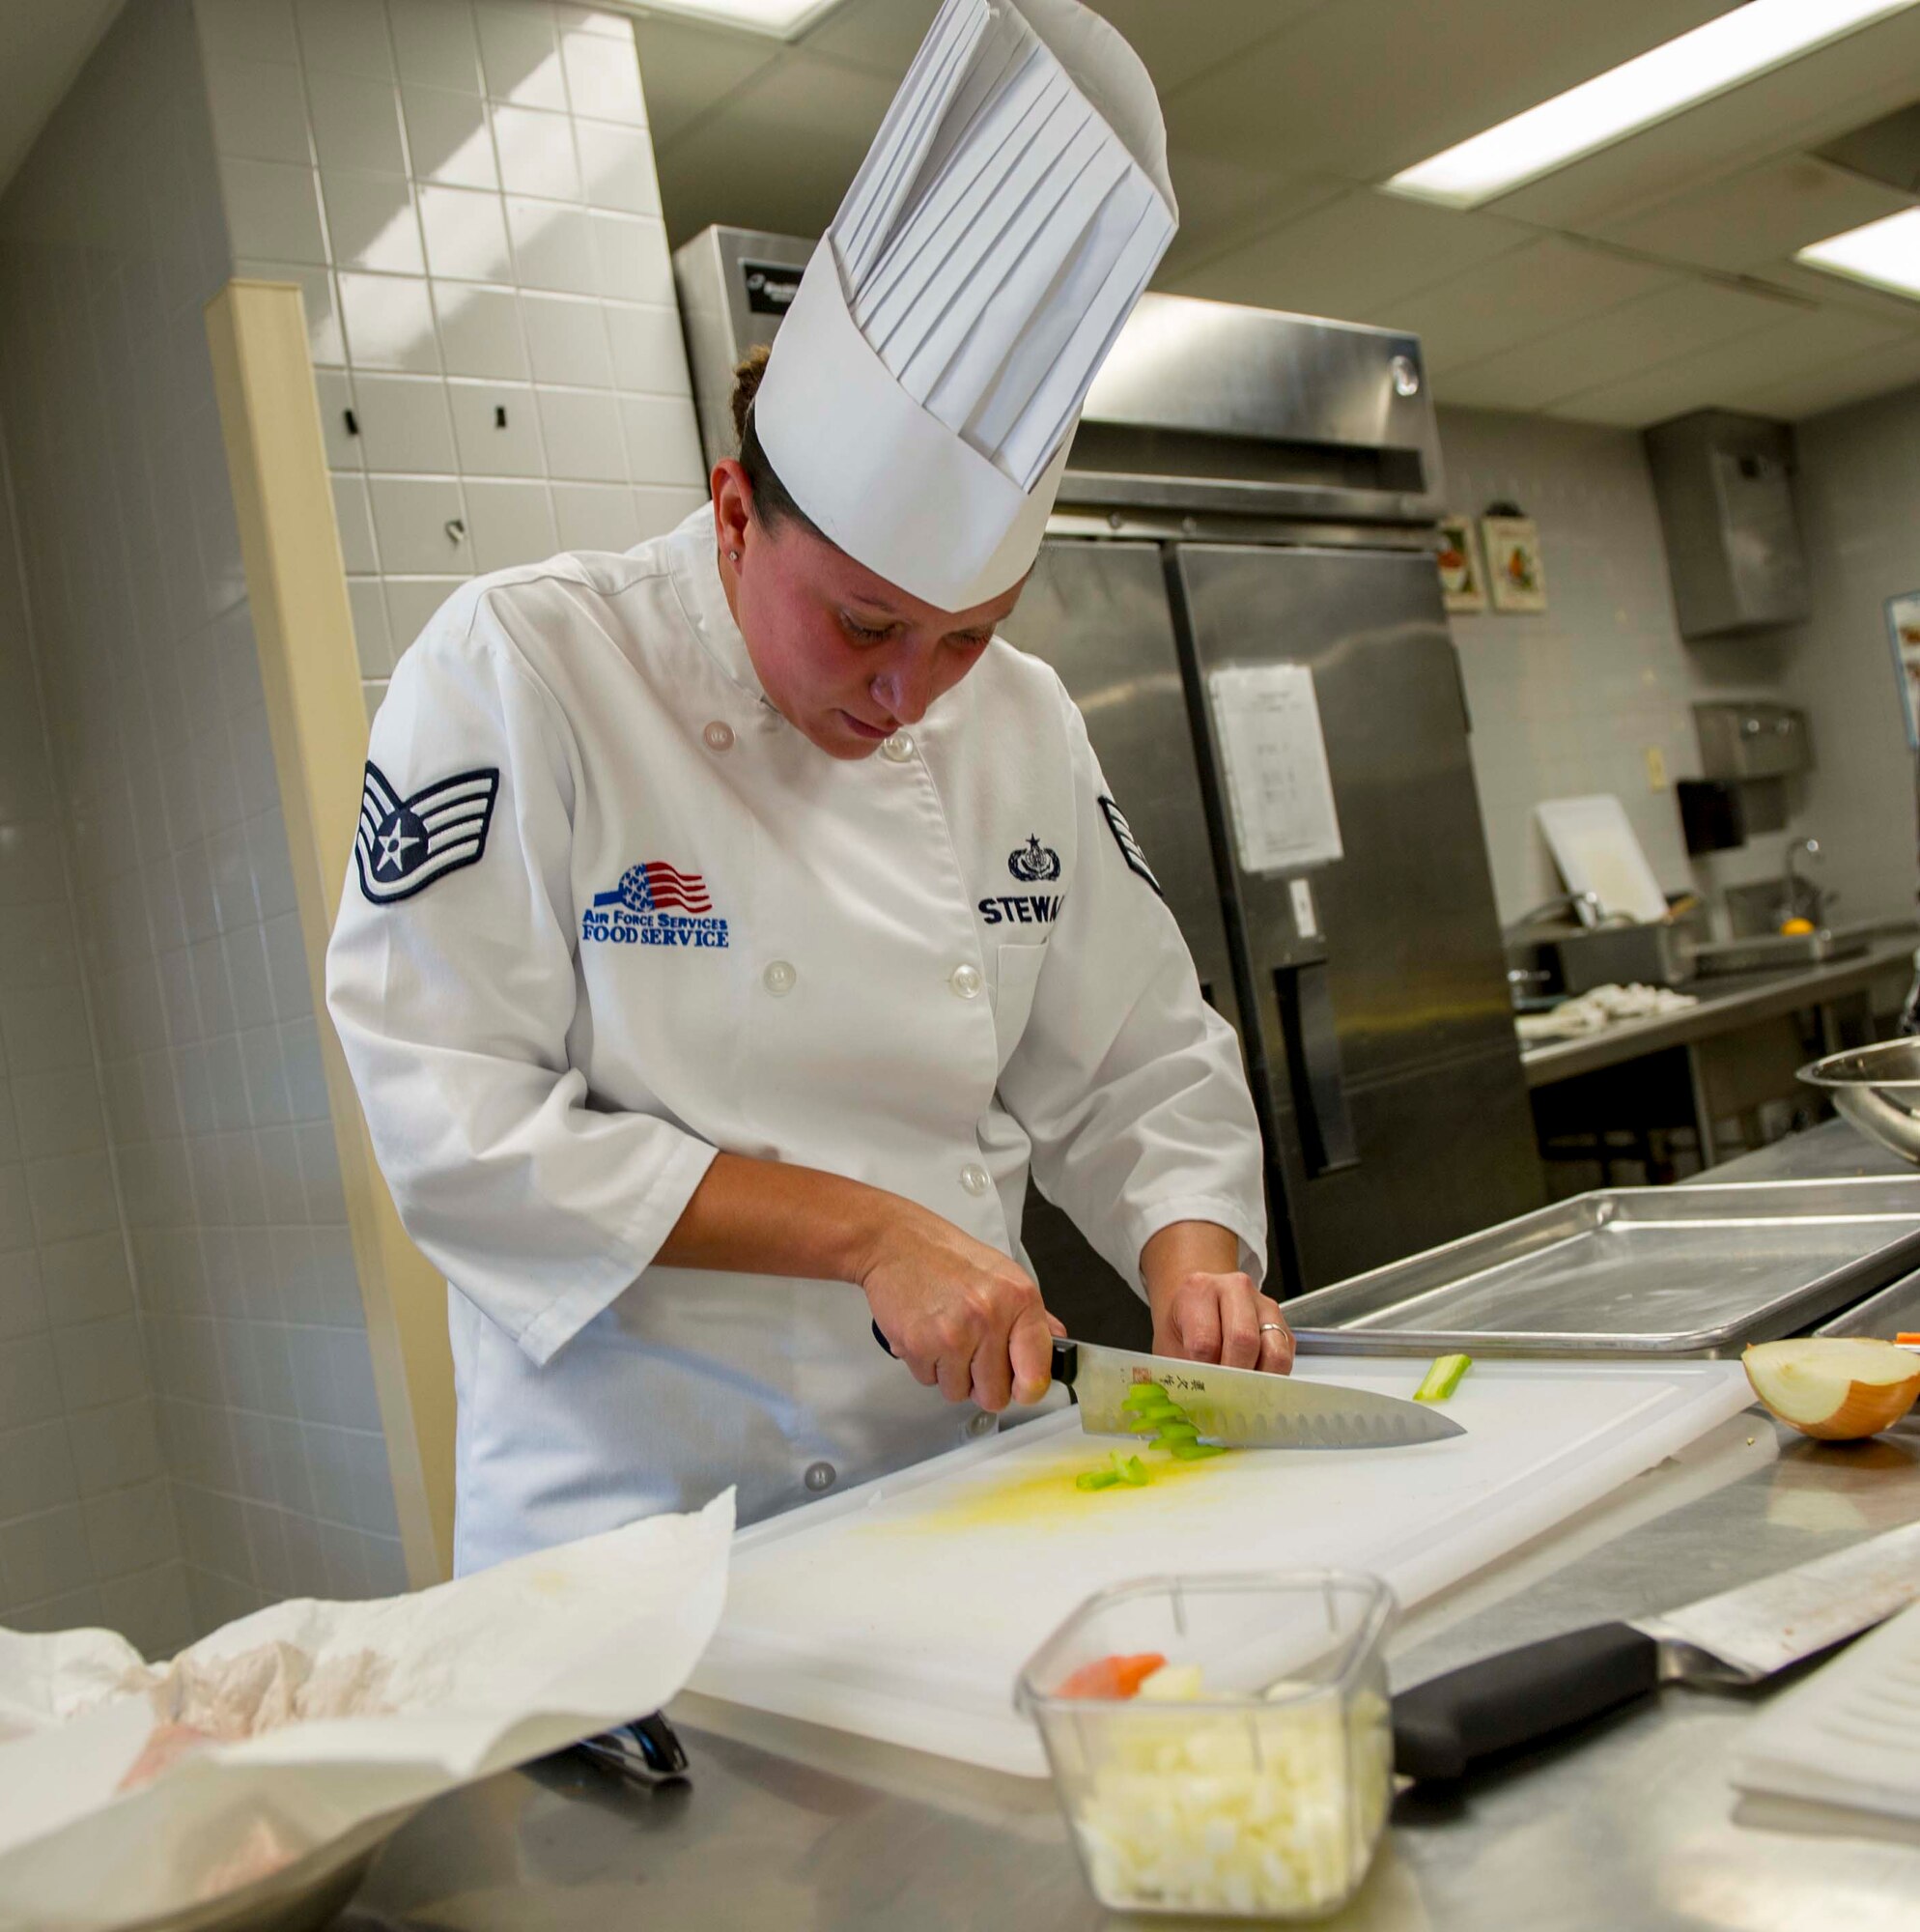 Staff Sgt. Sheryl Stewart, a 647th Force Support Squadron Airman assigned to the Joint Culinary Arts Team Hawaii, practices chopping techniques in the training kitchen at Schofield Barracks Oct. 22, 2014. Stewart will join 15 Soldiers, Sailors and Marines from around the island to face off in the annual Military Culinary Arts Competitive Training Event in Fort Lee, Va., next year. (U.S. Air Force photo by Tech. Sgt. Terri Paden)